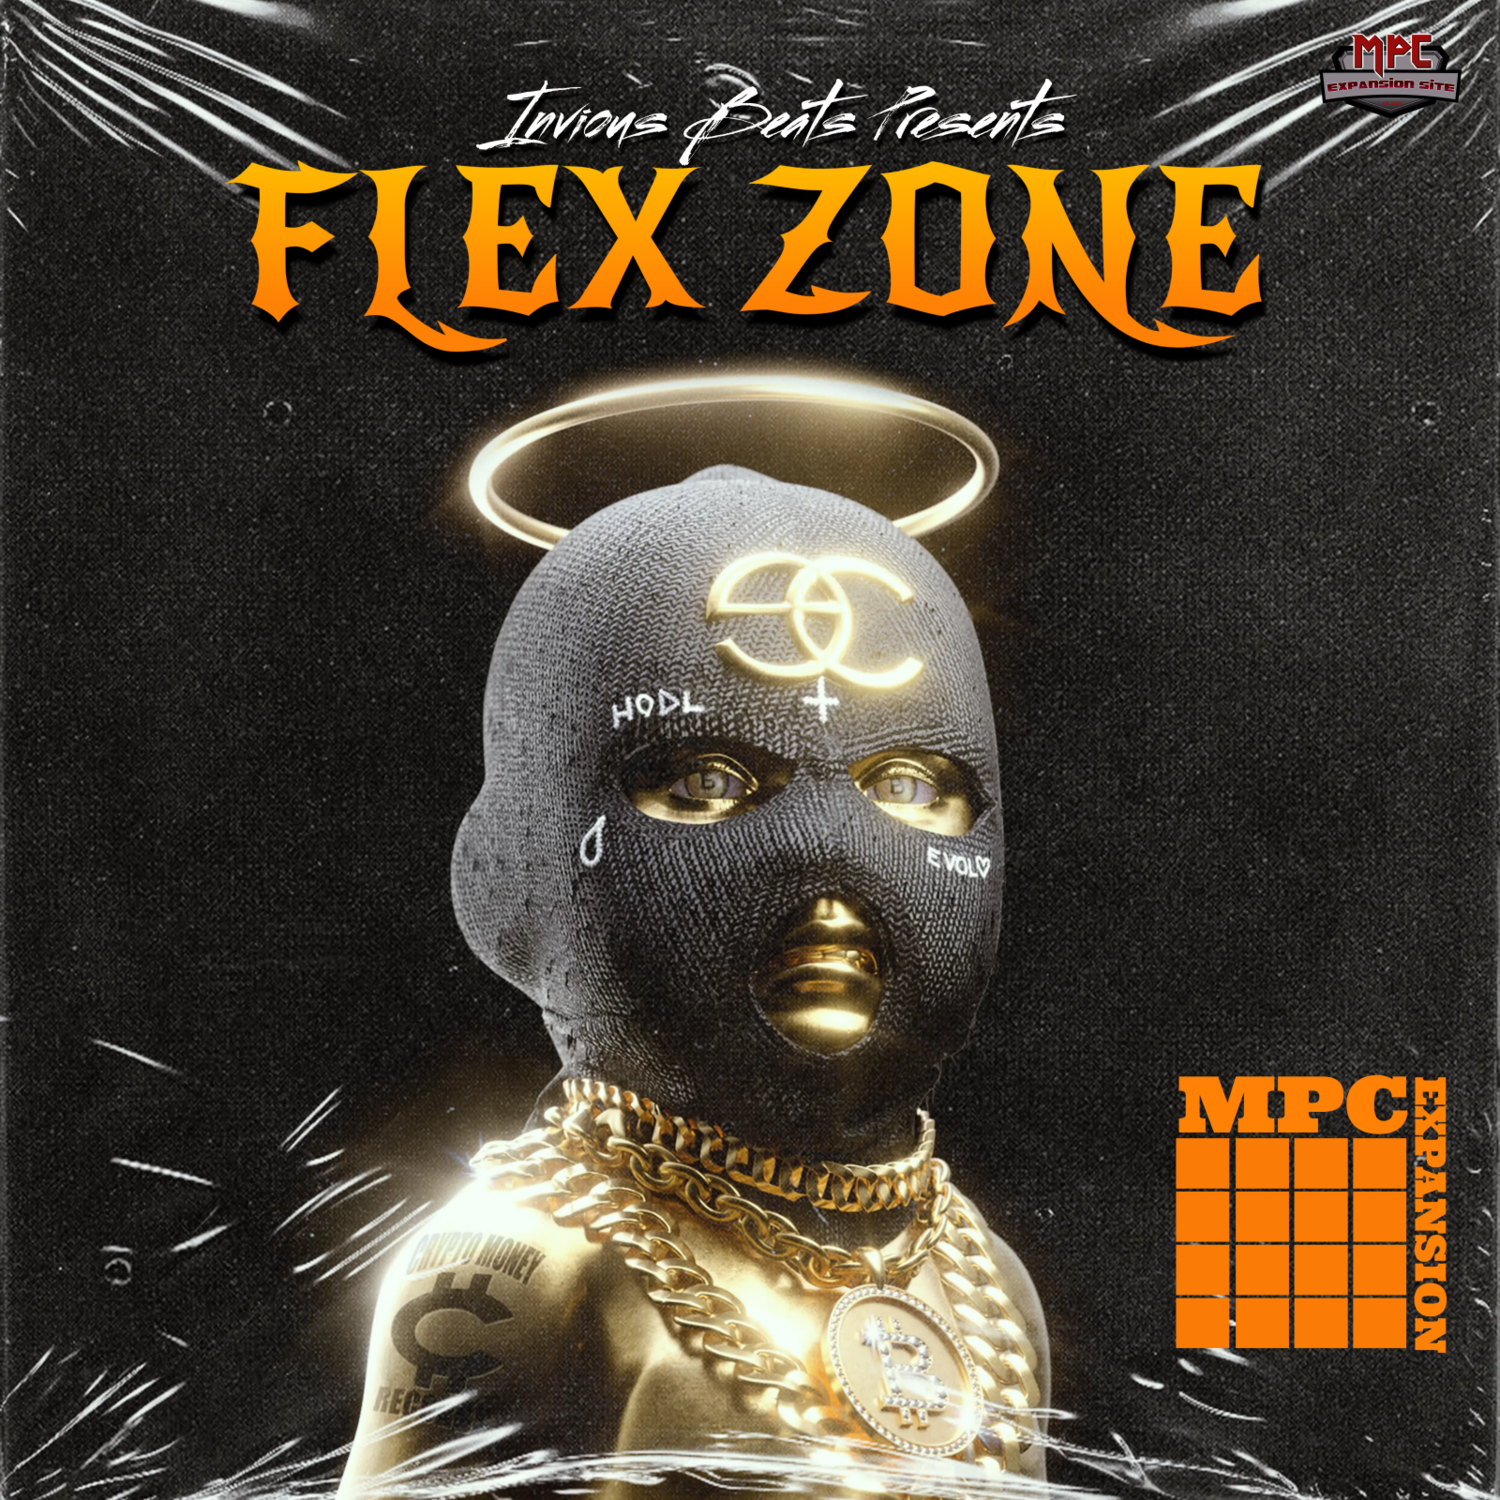 MPC EXPANSION 'FLEX ZONE' by INVIOUS